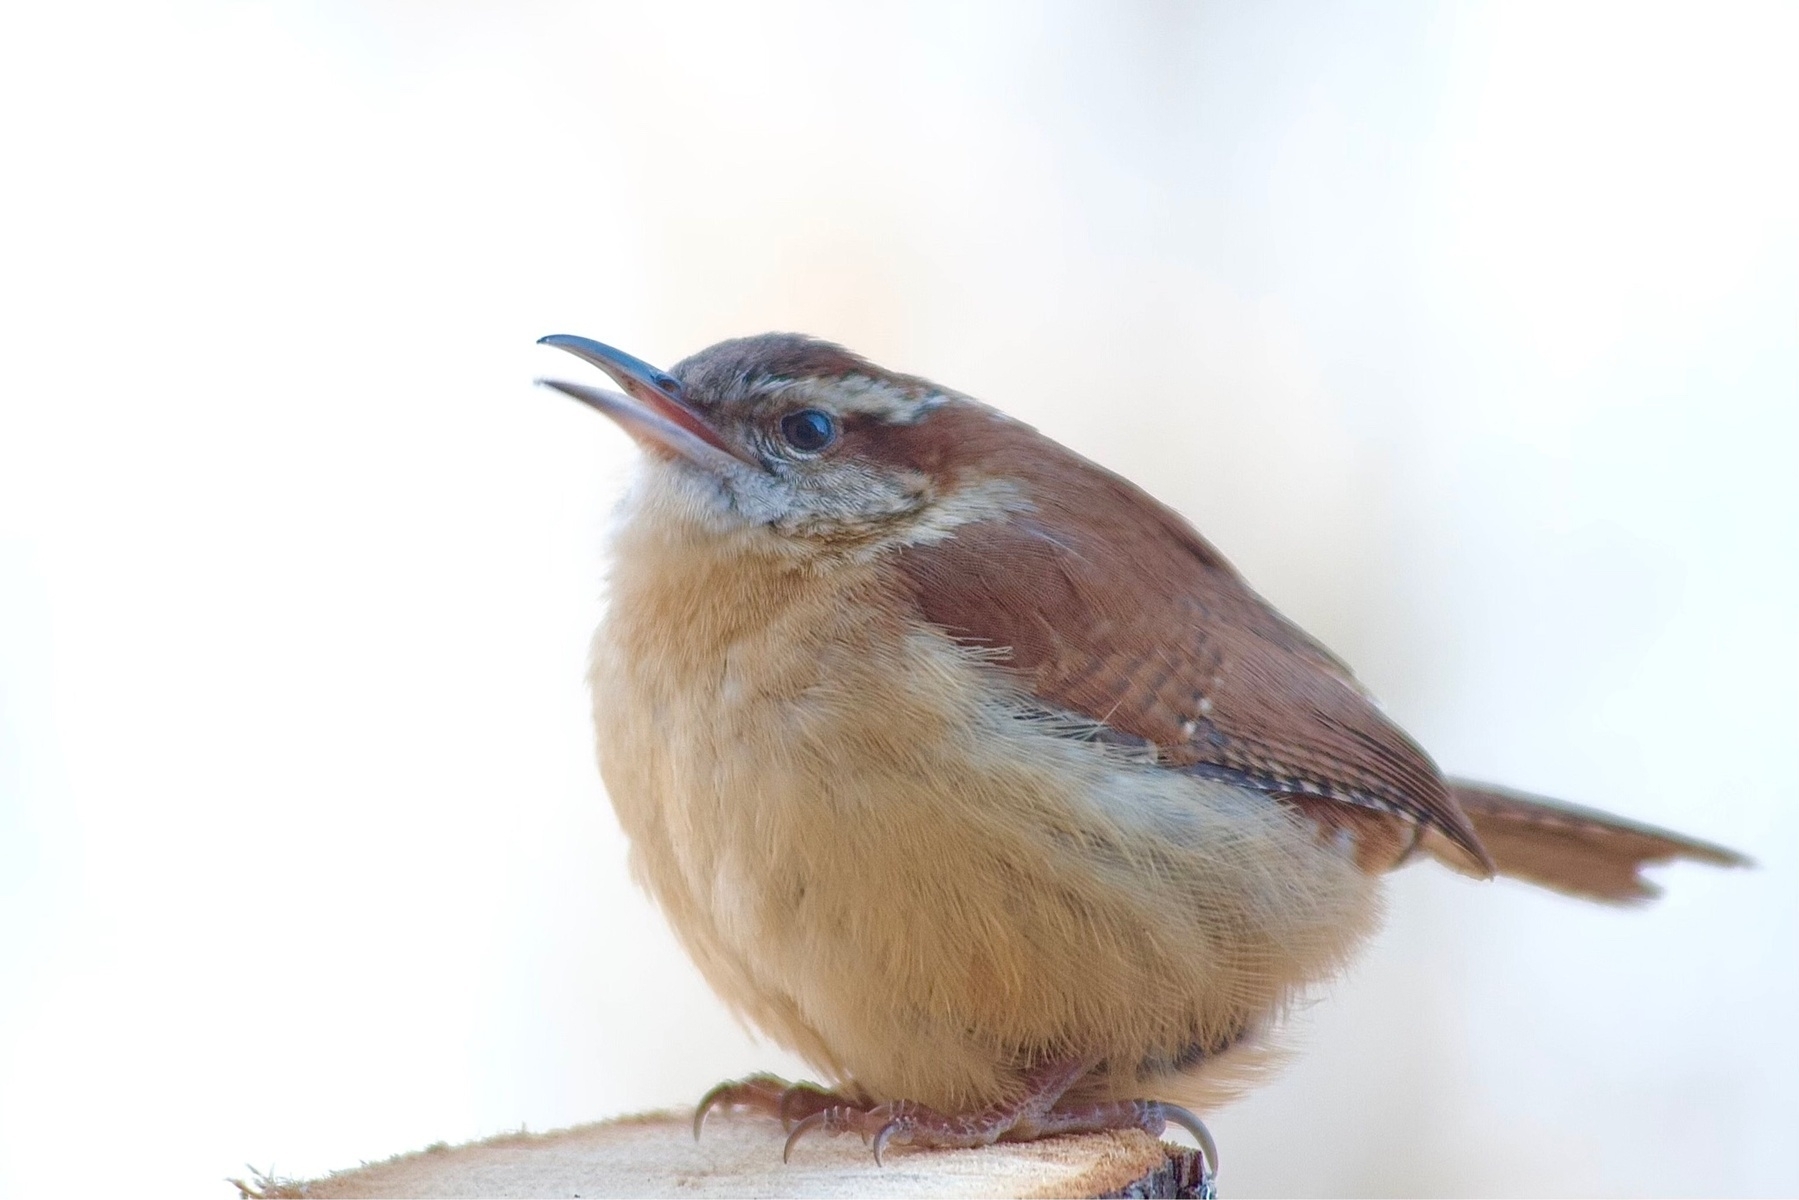 A small bird with a long white eyebrow, light brown underside and darker brown backside is perched on a wood stump. The background is a blurred white.The bird's beak is open and it appears to be singing.